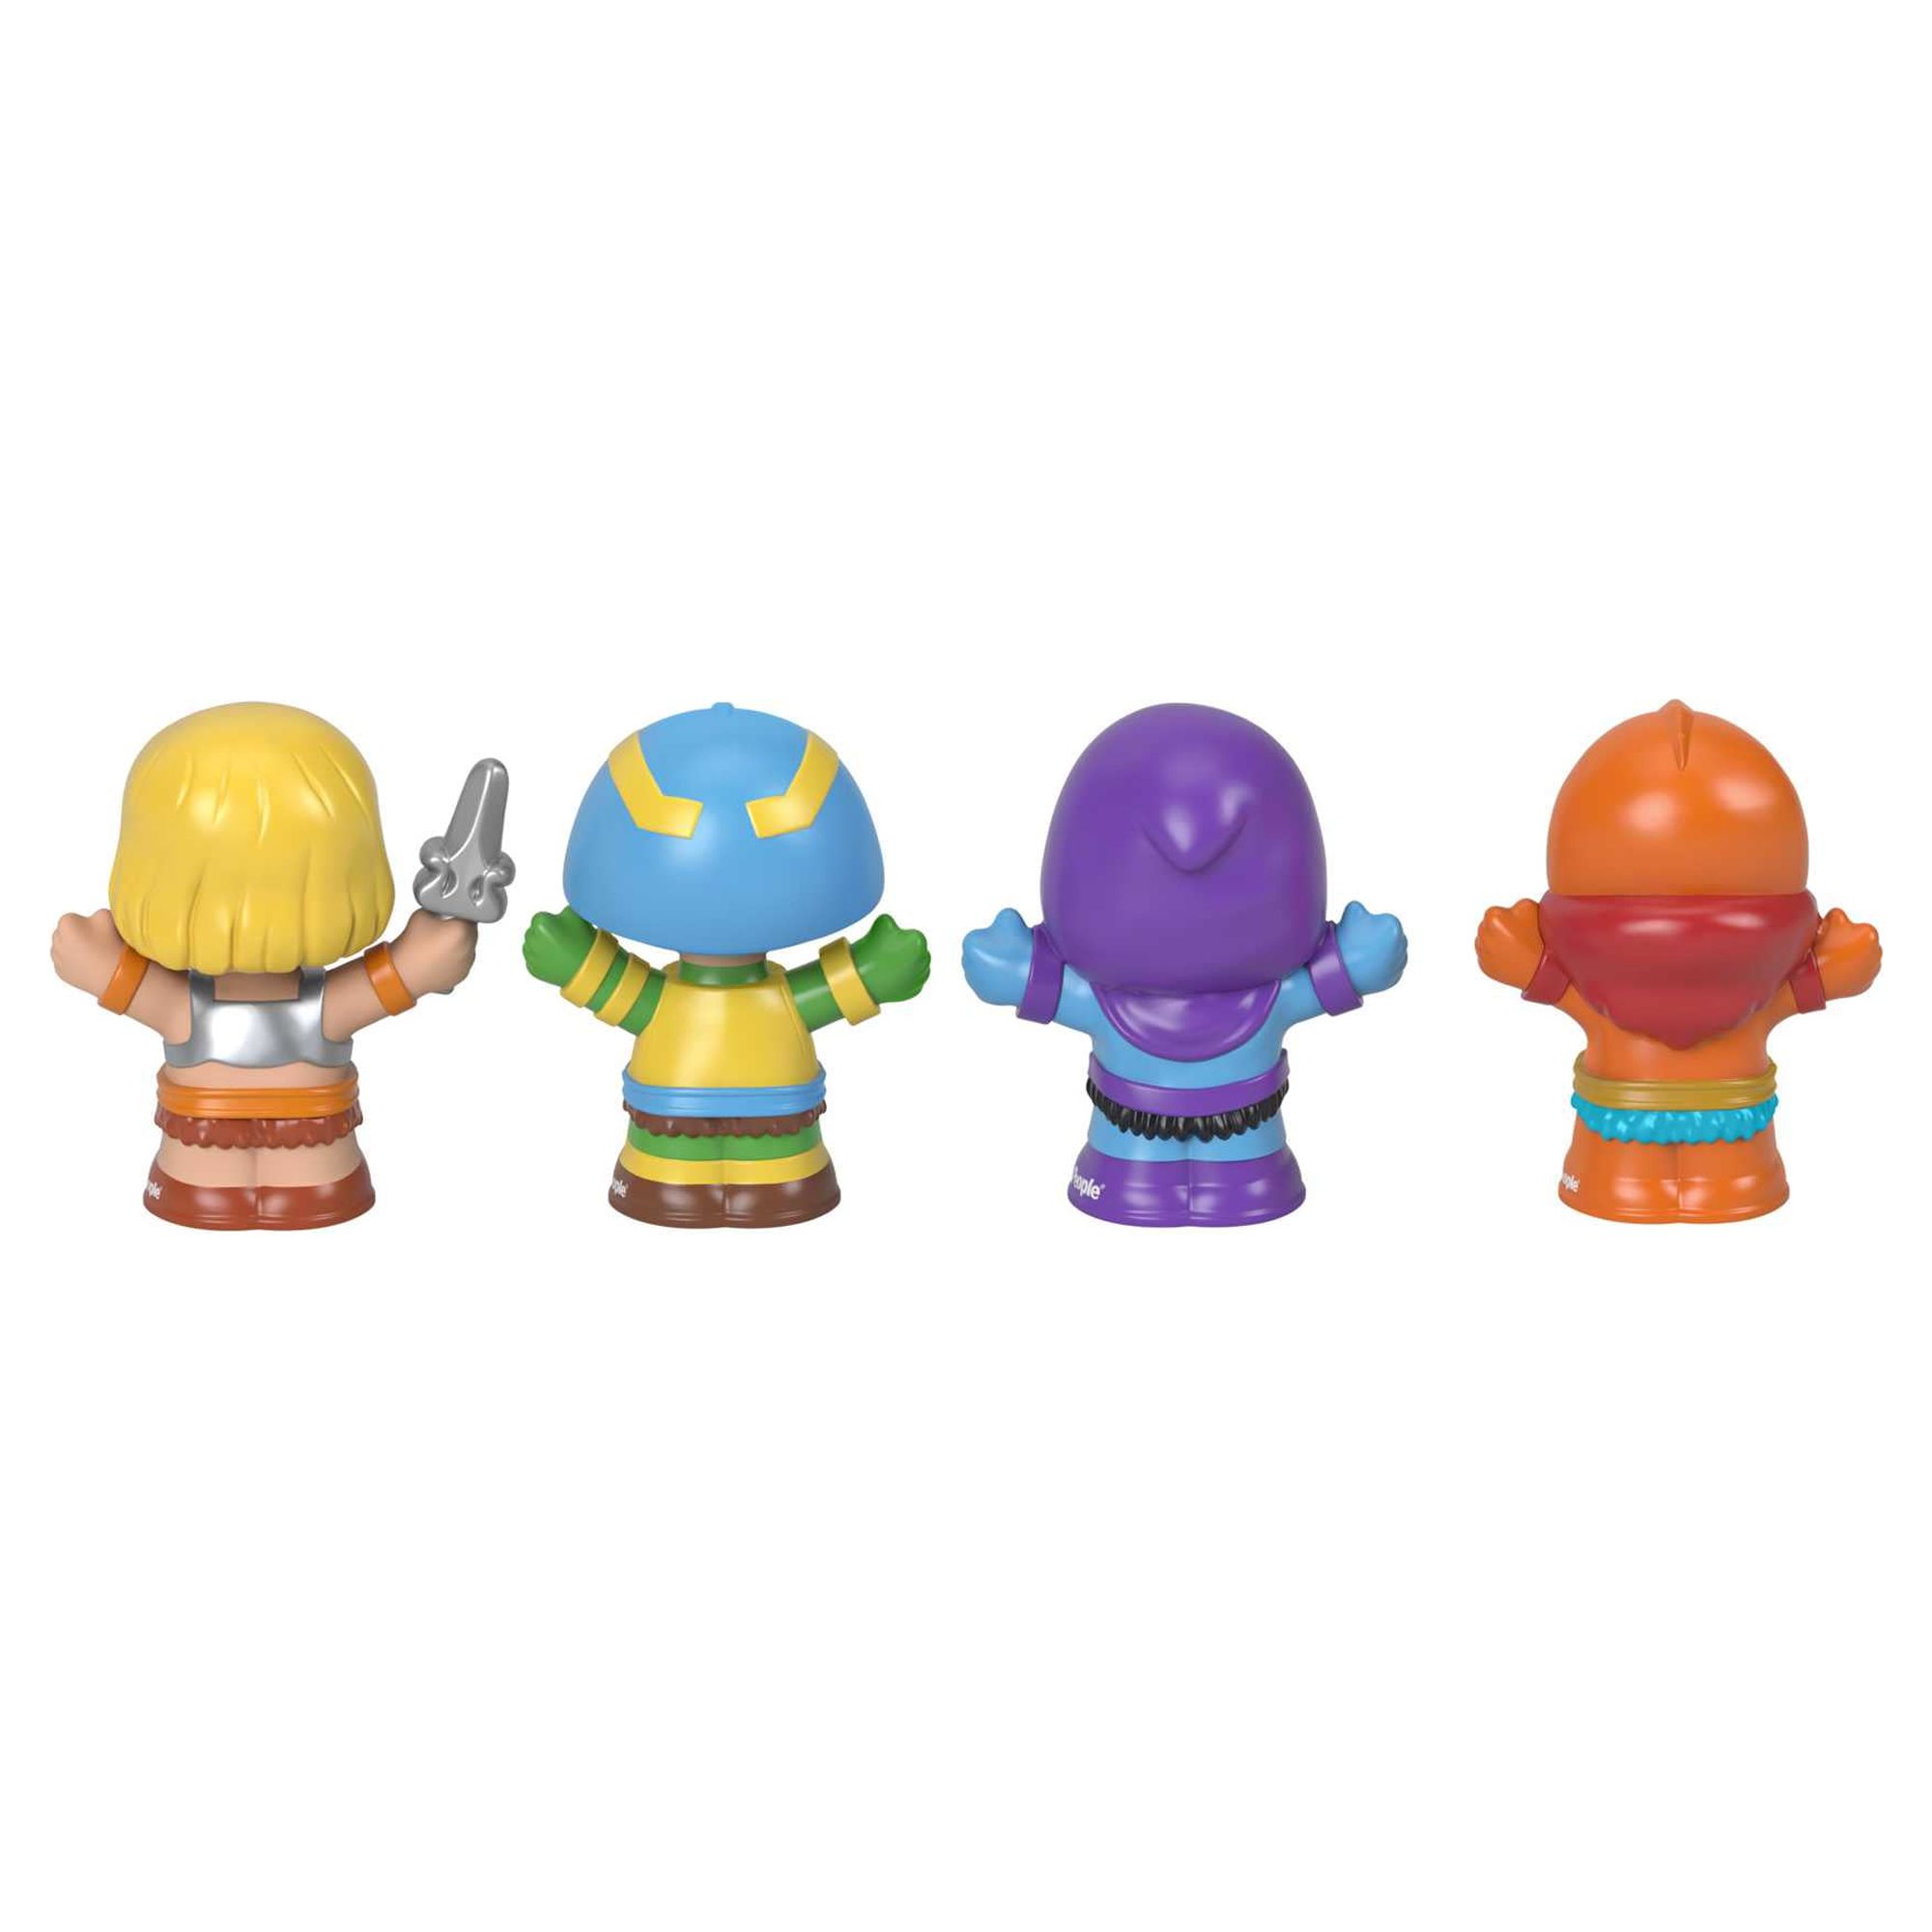 Little People Collector Masters of the Universe Special Edition Set for Adults & Fans, 4 Figures - image 5 of 5